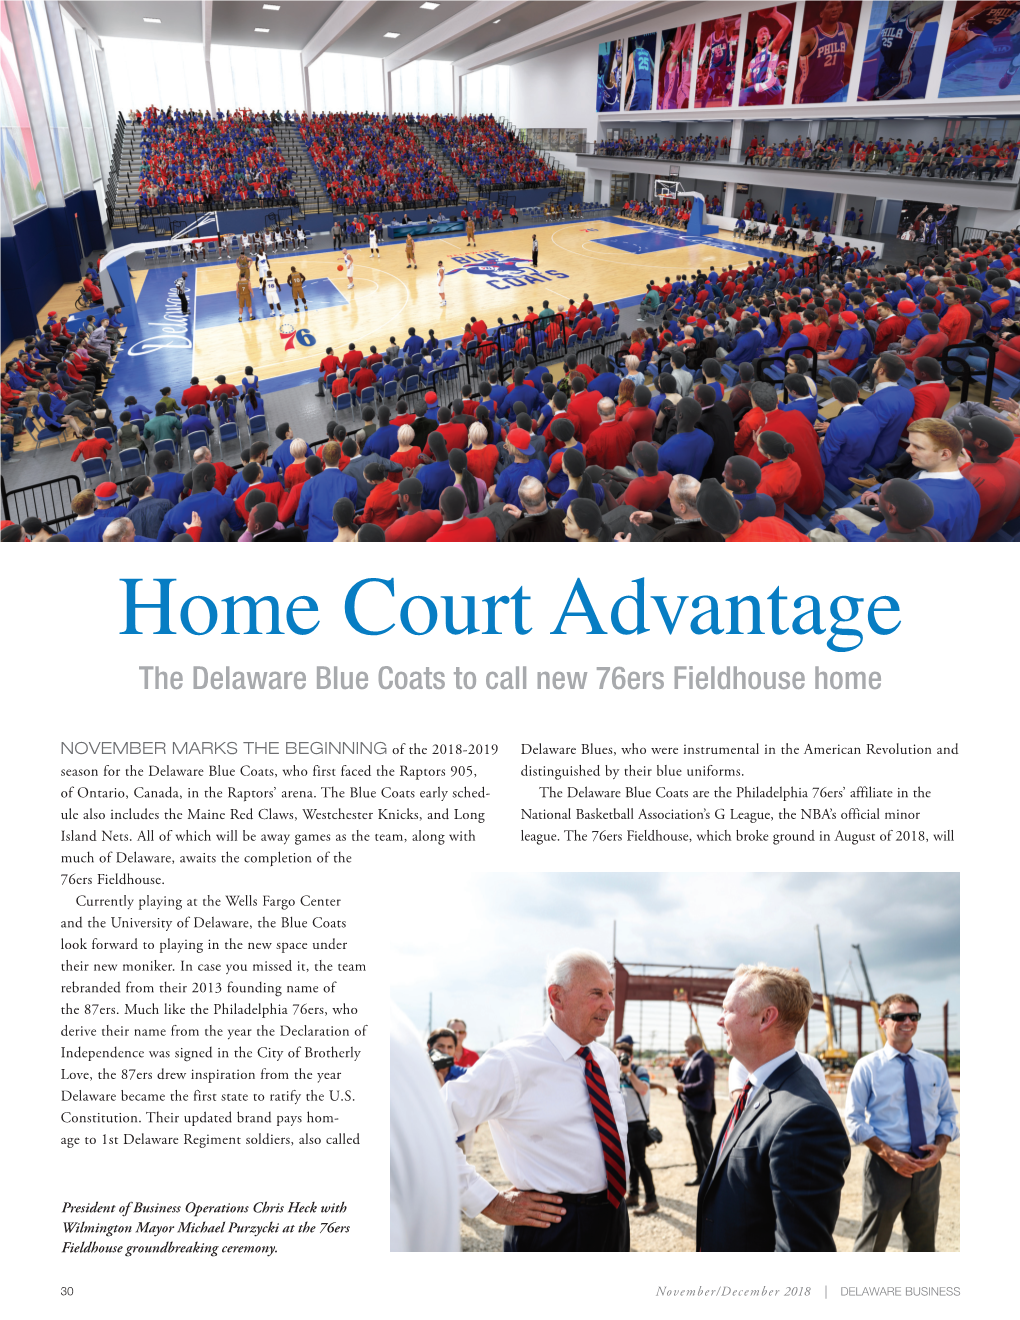 Home Court Advantage the Delaware Blue Coats to Call New 76Ers Fieldhouse Home